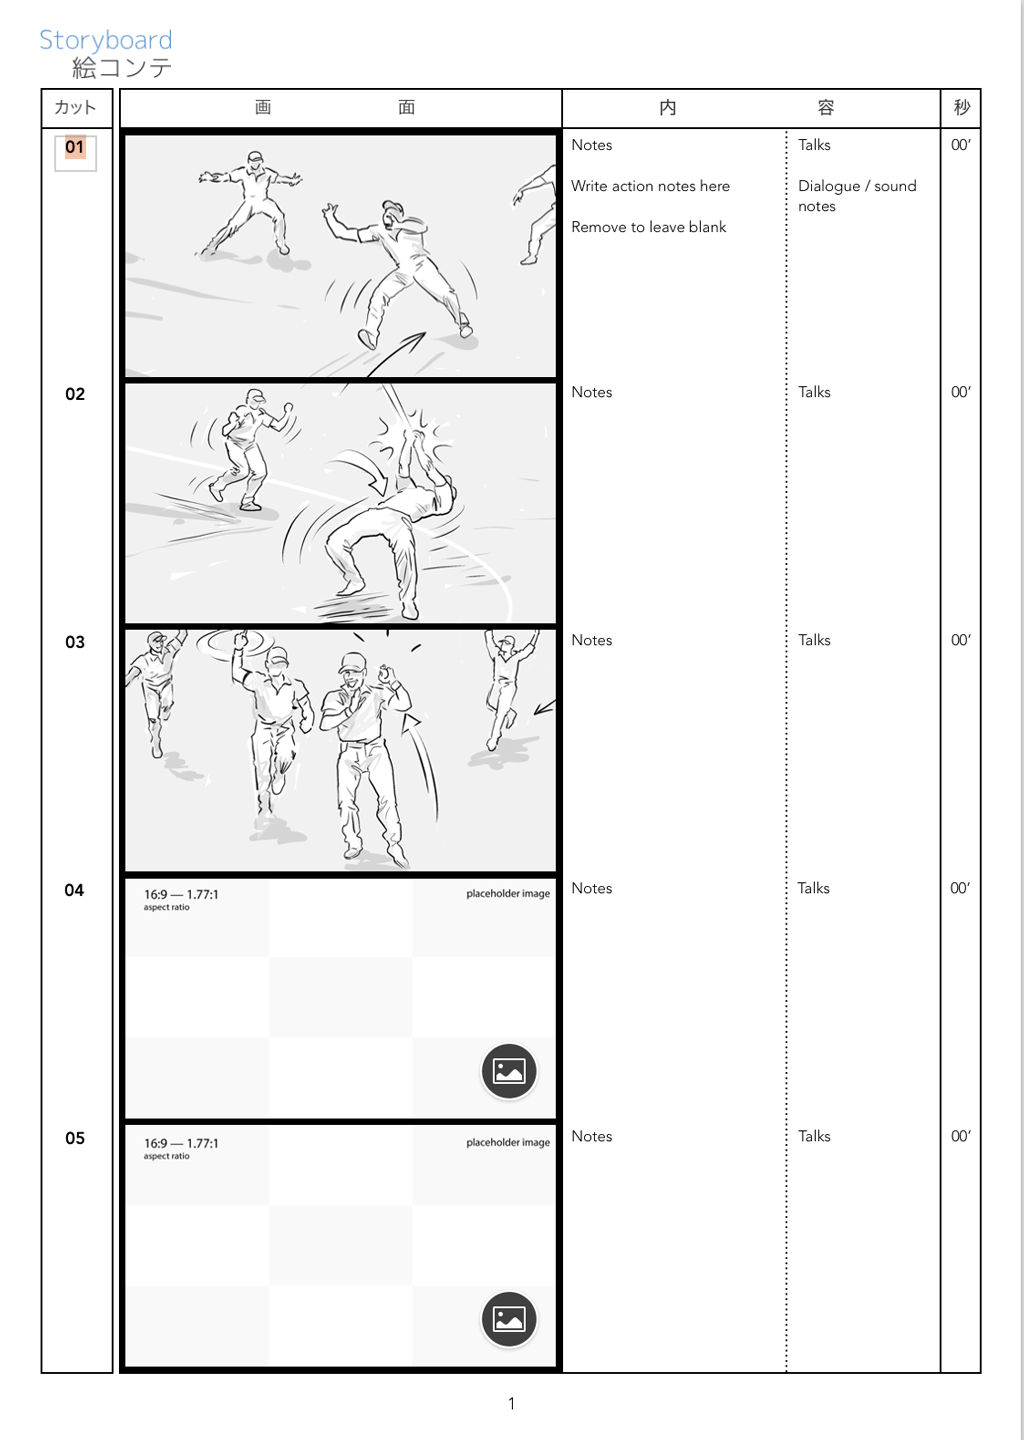 Anime storyboard template, with 5 frames per sheet, 16:9 aspect ratio for Apple Page, sample